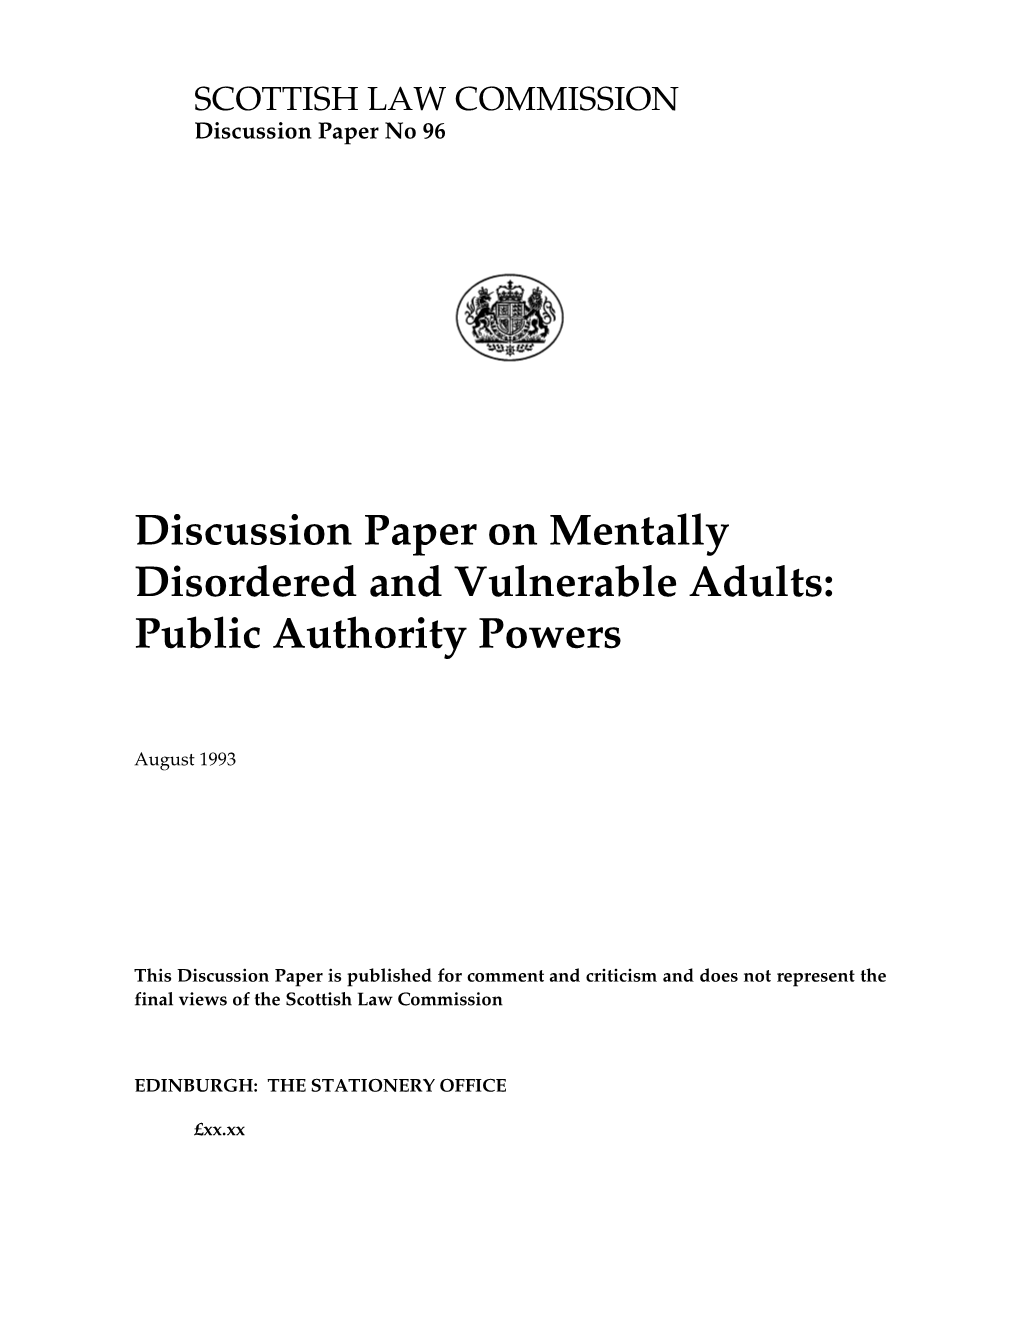 Mentally Disordered and Vulnerable Adults: Public Authority Powers